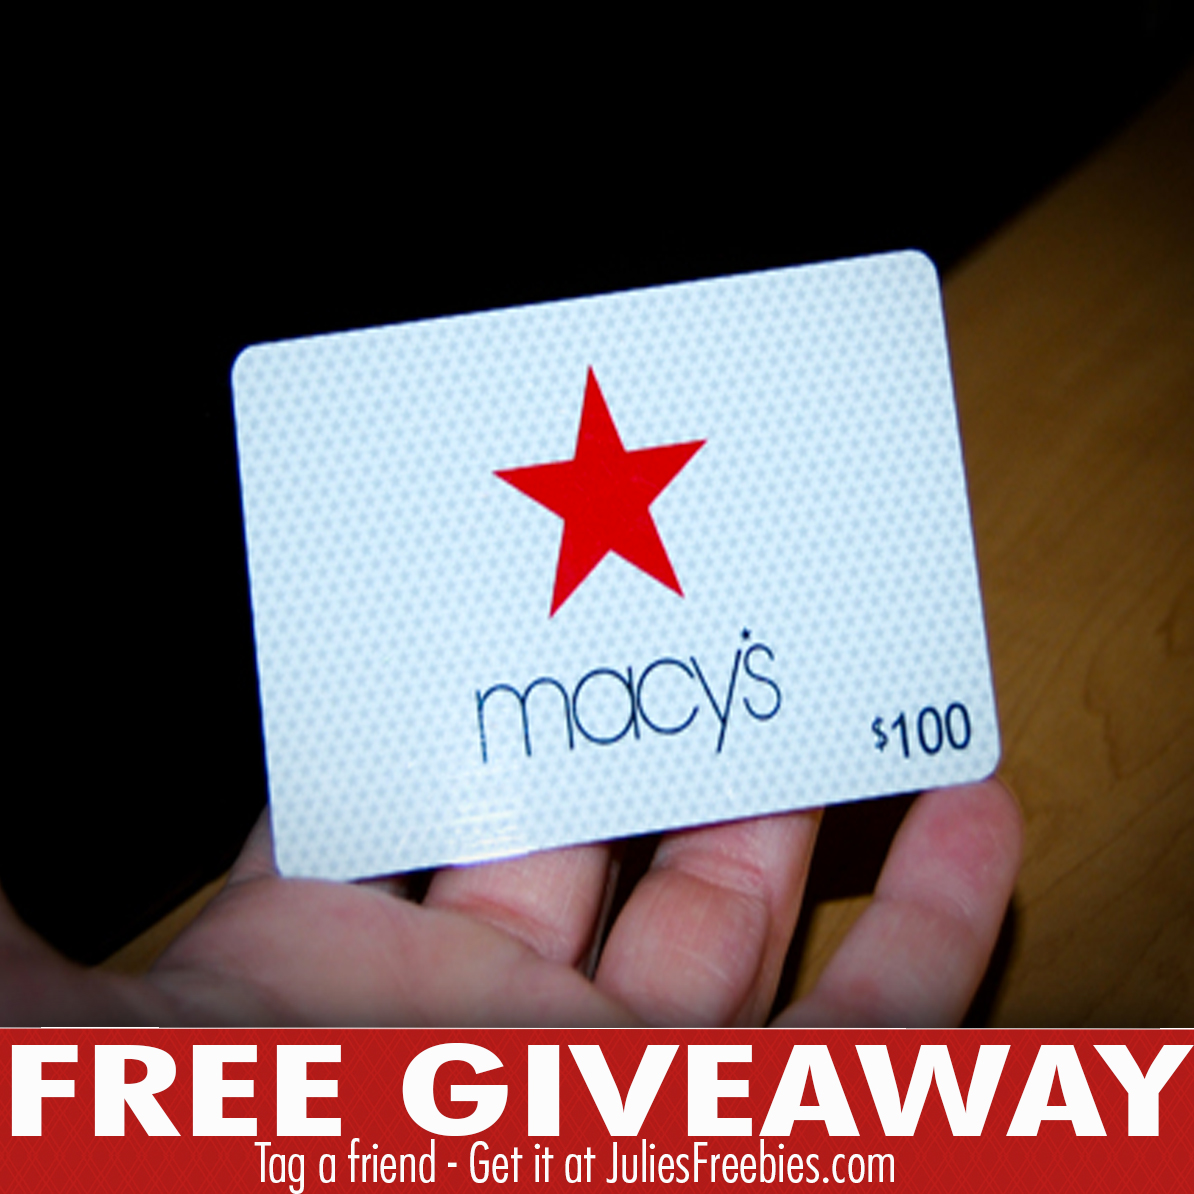 Hello my friends! Listen up- as a Macy's cardholder, you are in for a  unique and limited event @macys June 29-July 5 Star Rewards event…